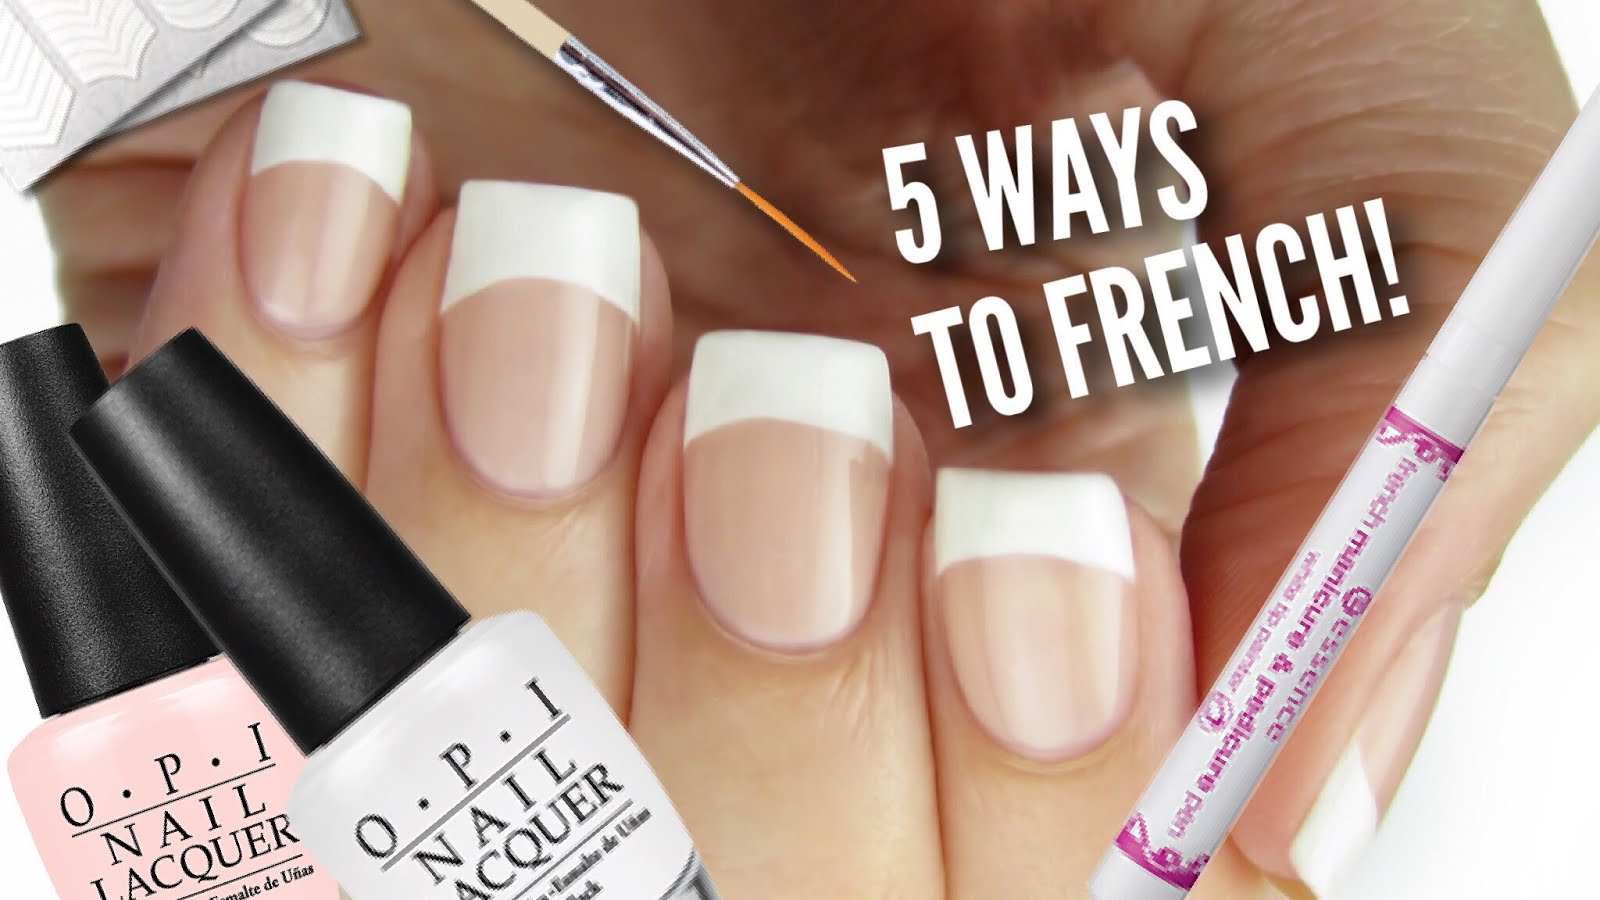 5. "Vintage French Manicure Tutorial" - wide 6